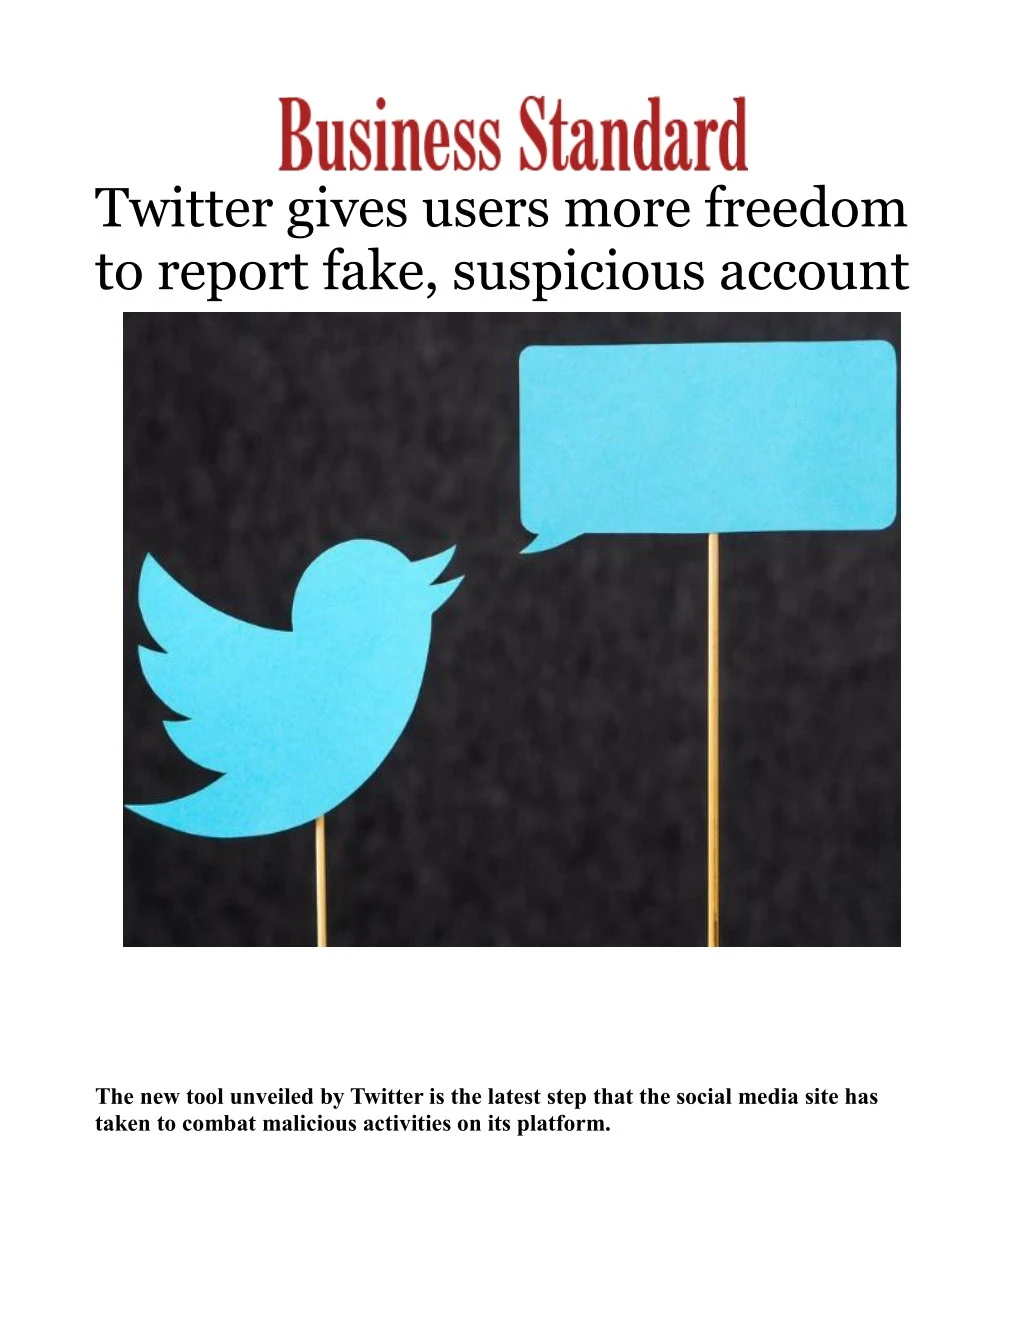 twitter gives users more freedom to report fake